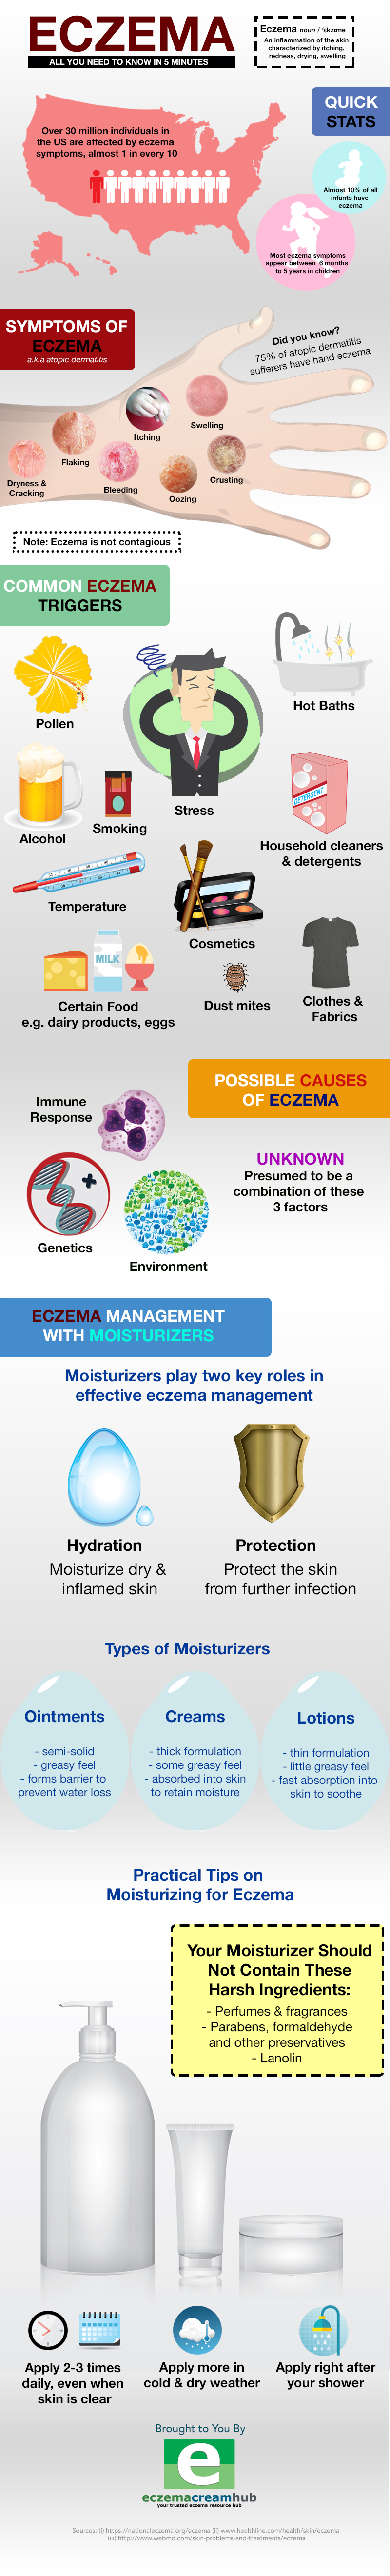 Eczema: All You Need to Know in 5 Minutes